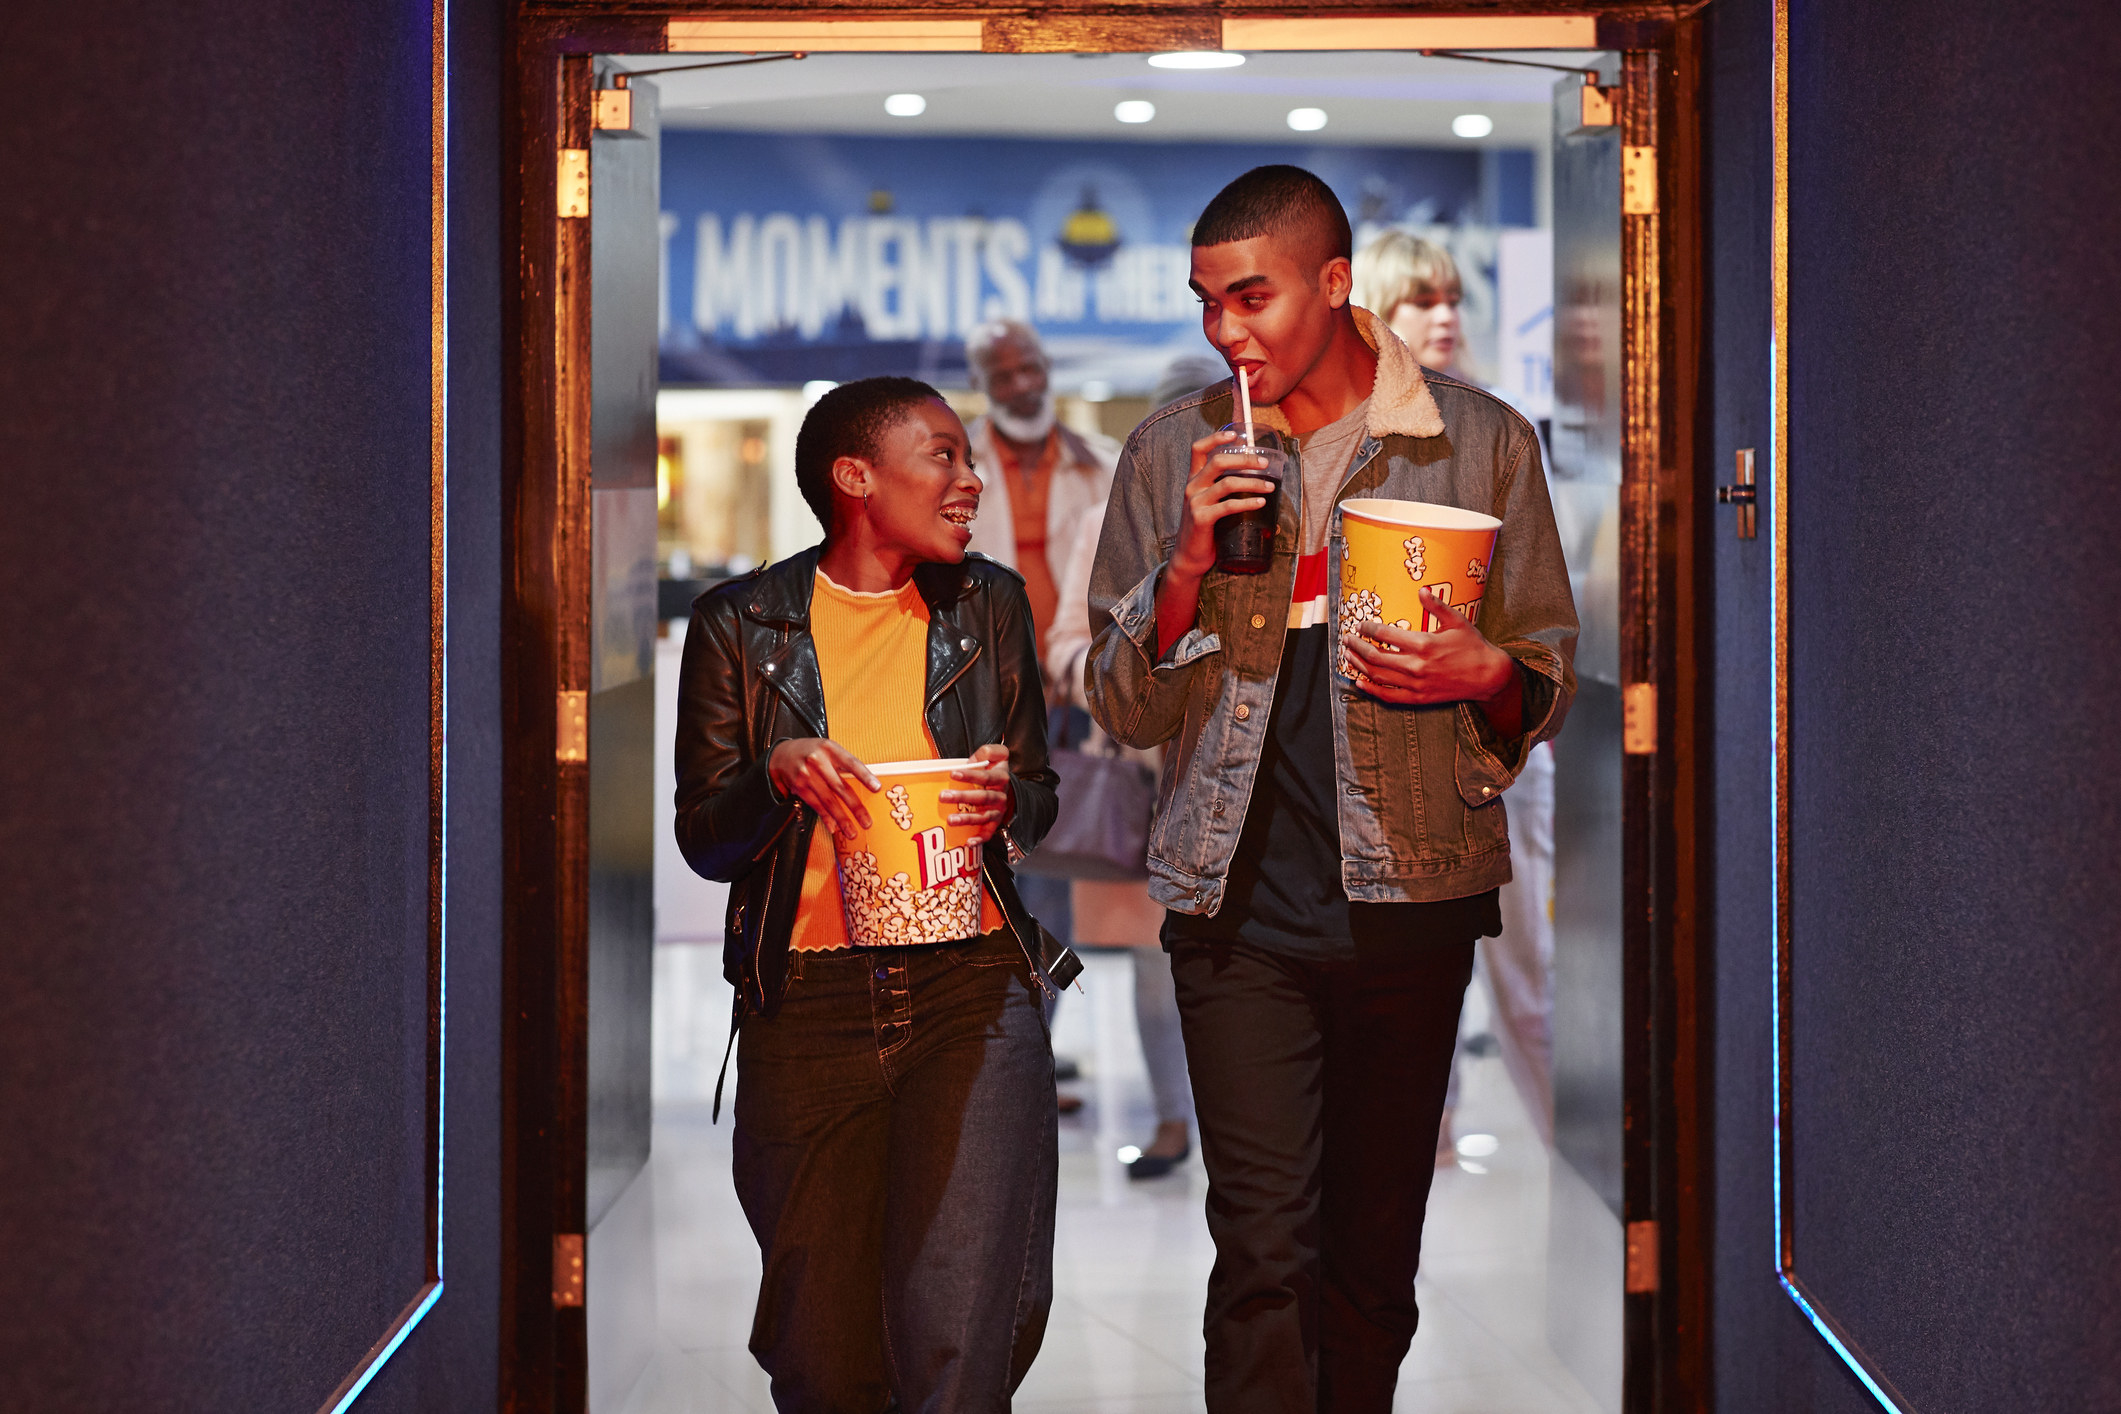 A couple talking while walking in corridor, exiting a movie date.